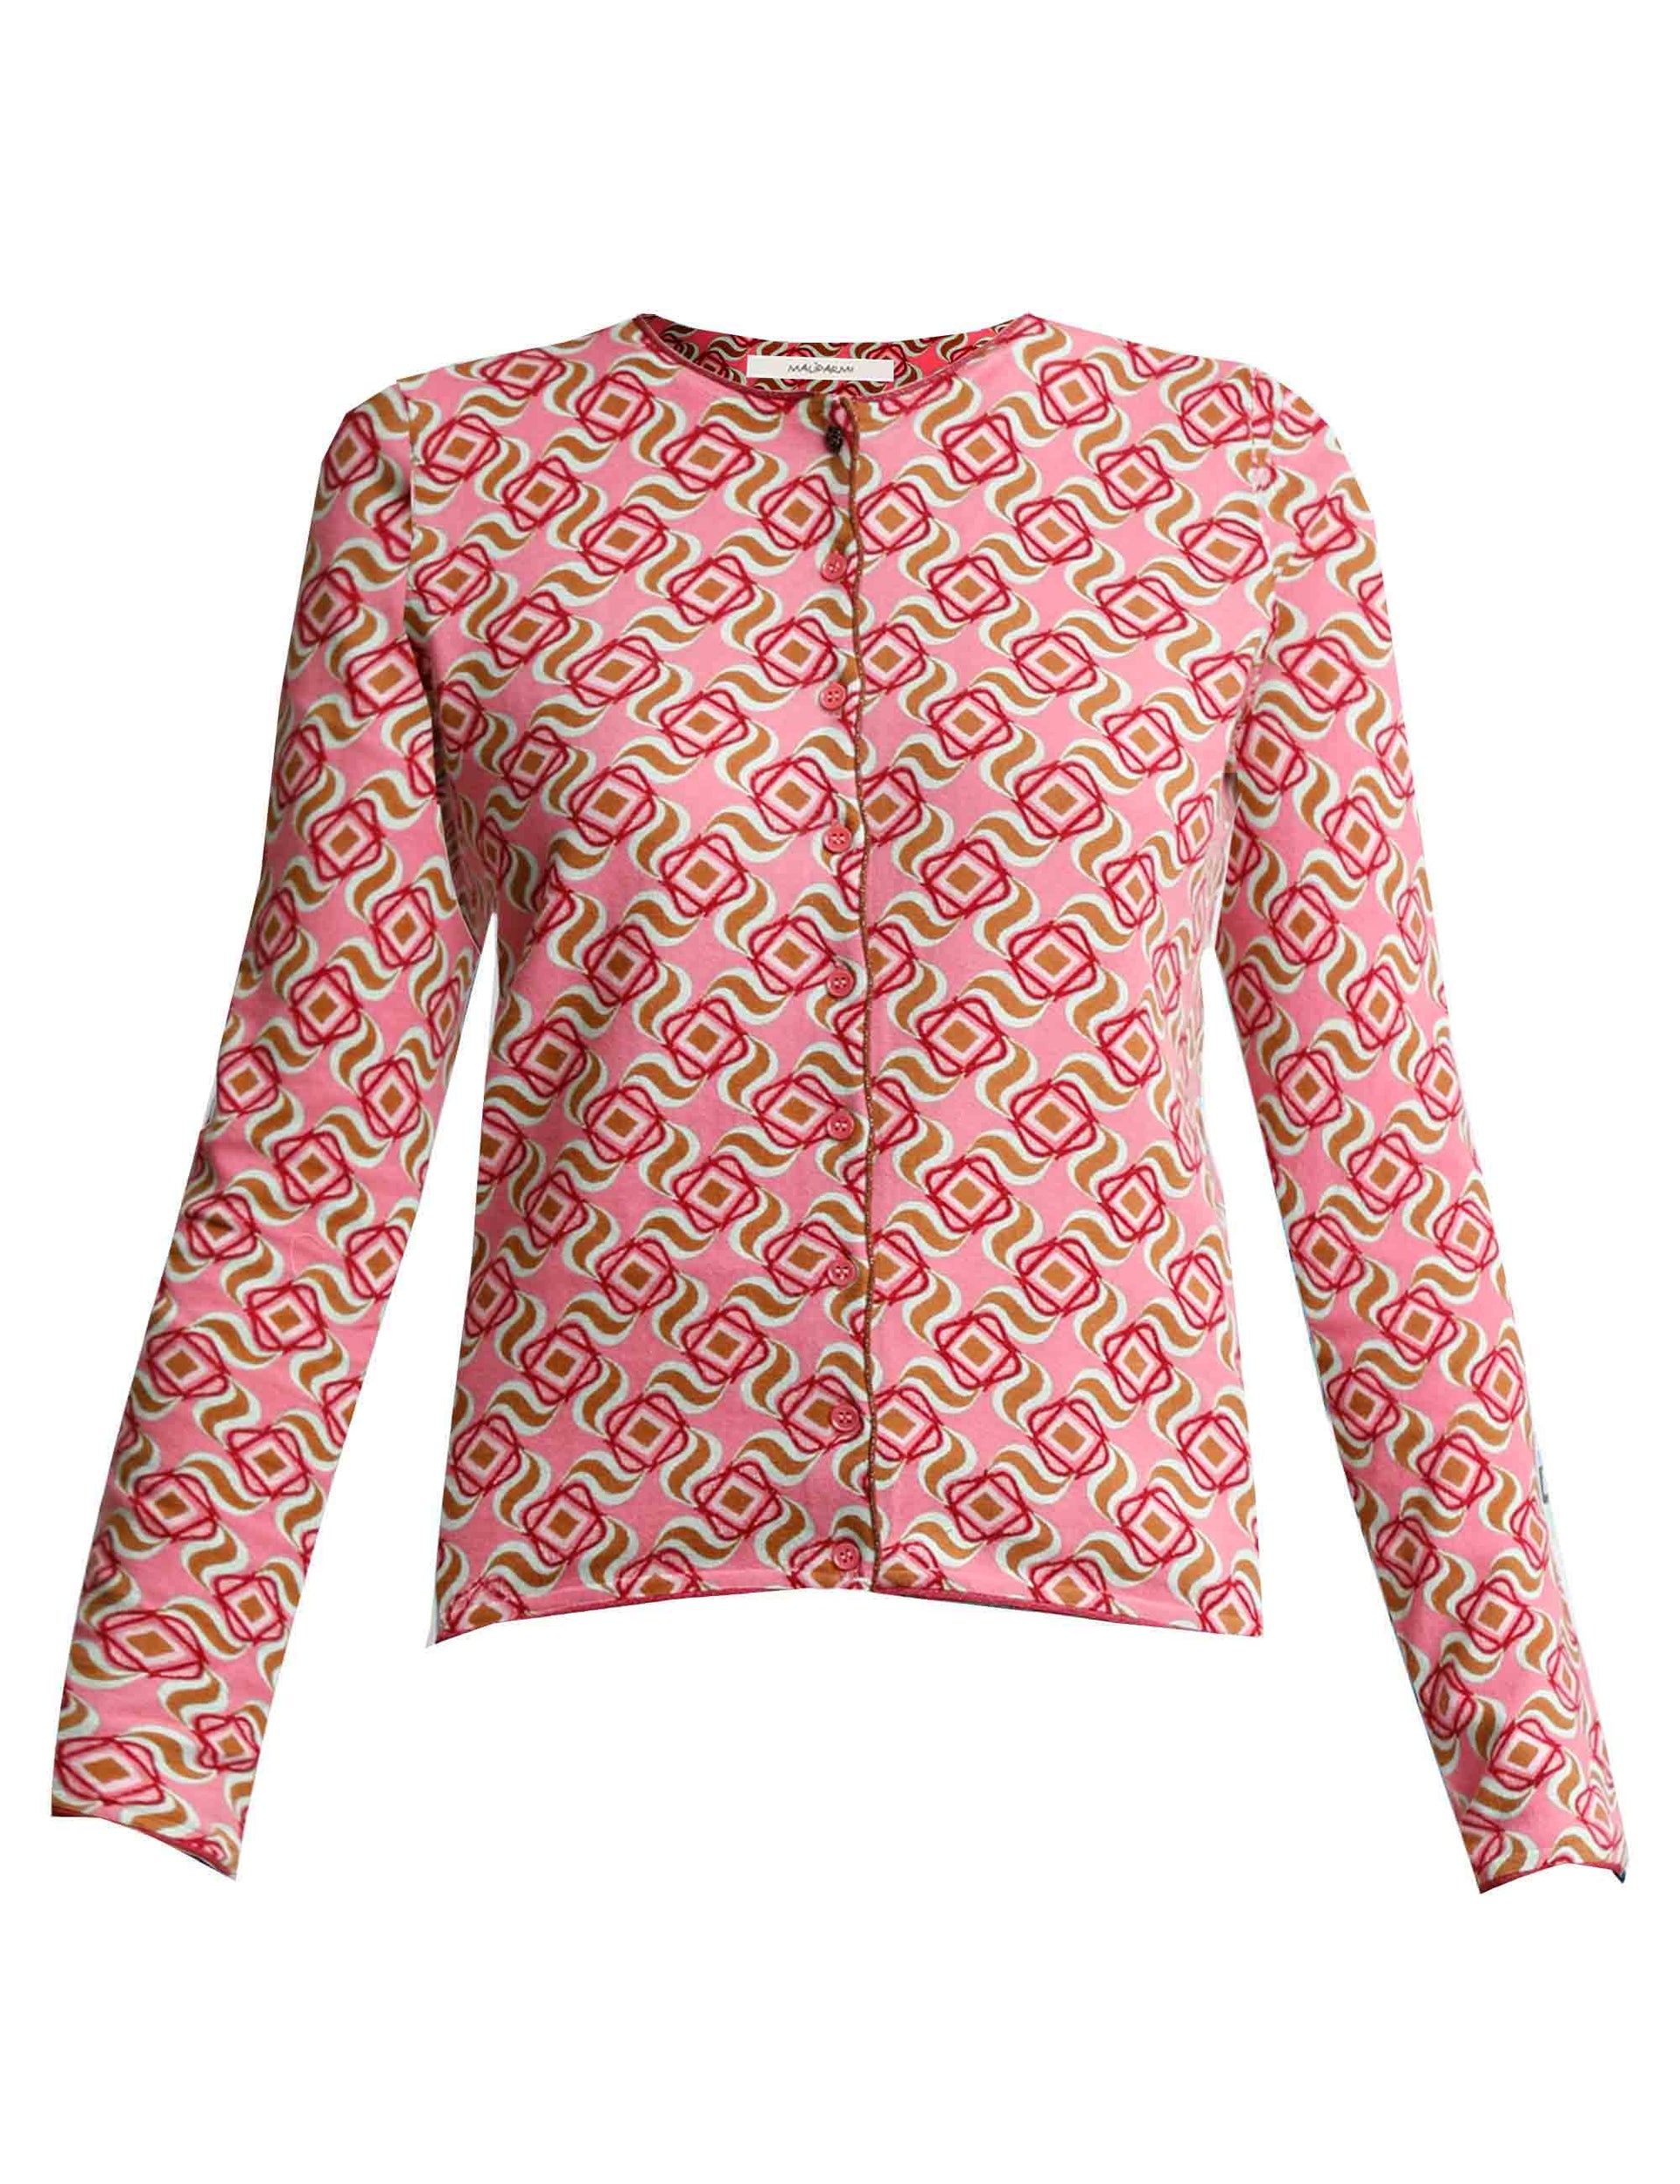 Printed women's cardigan sweaters in pink patterned cotton